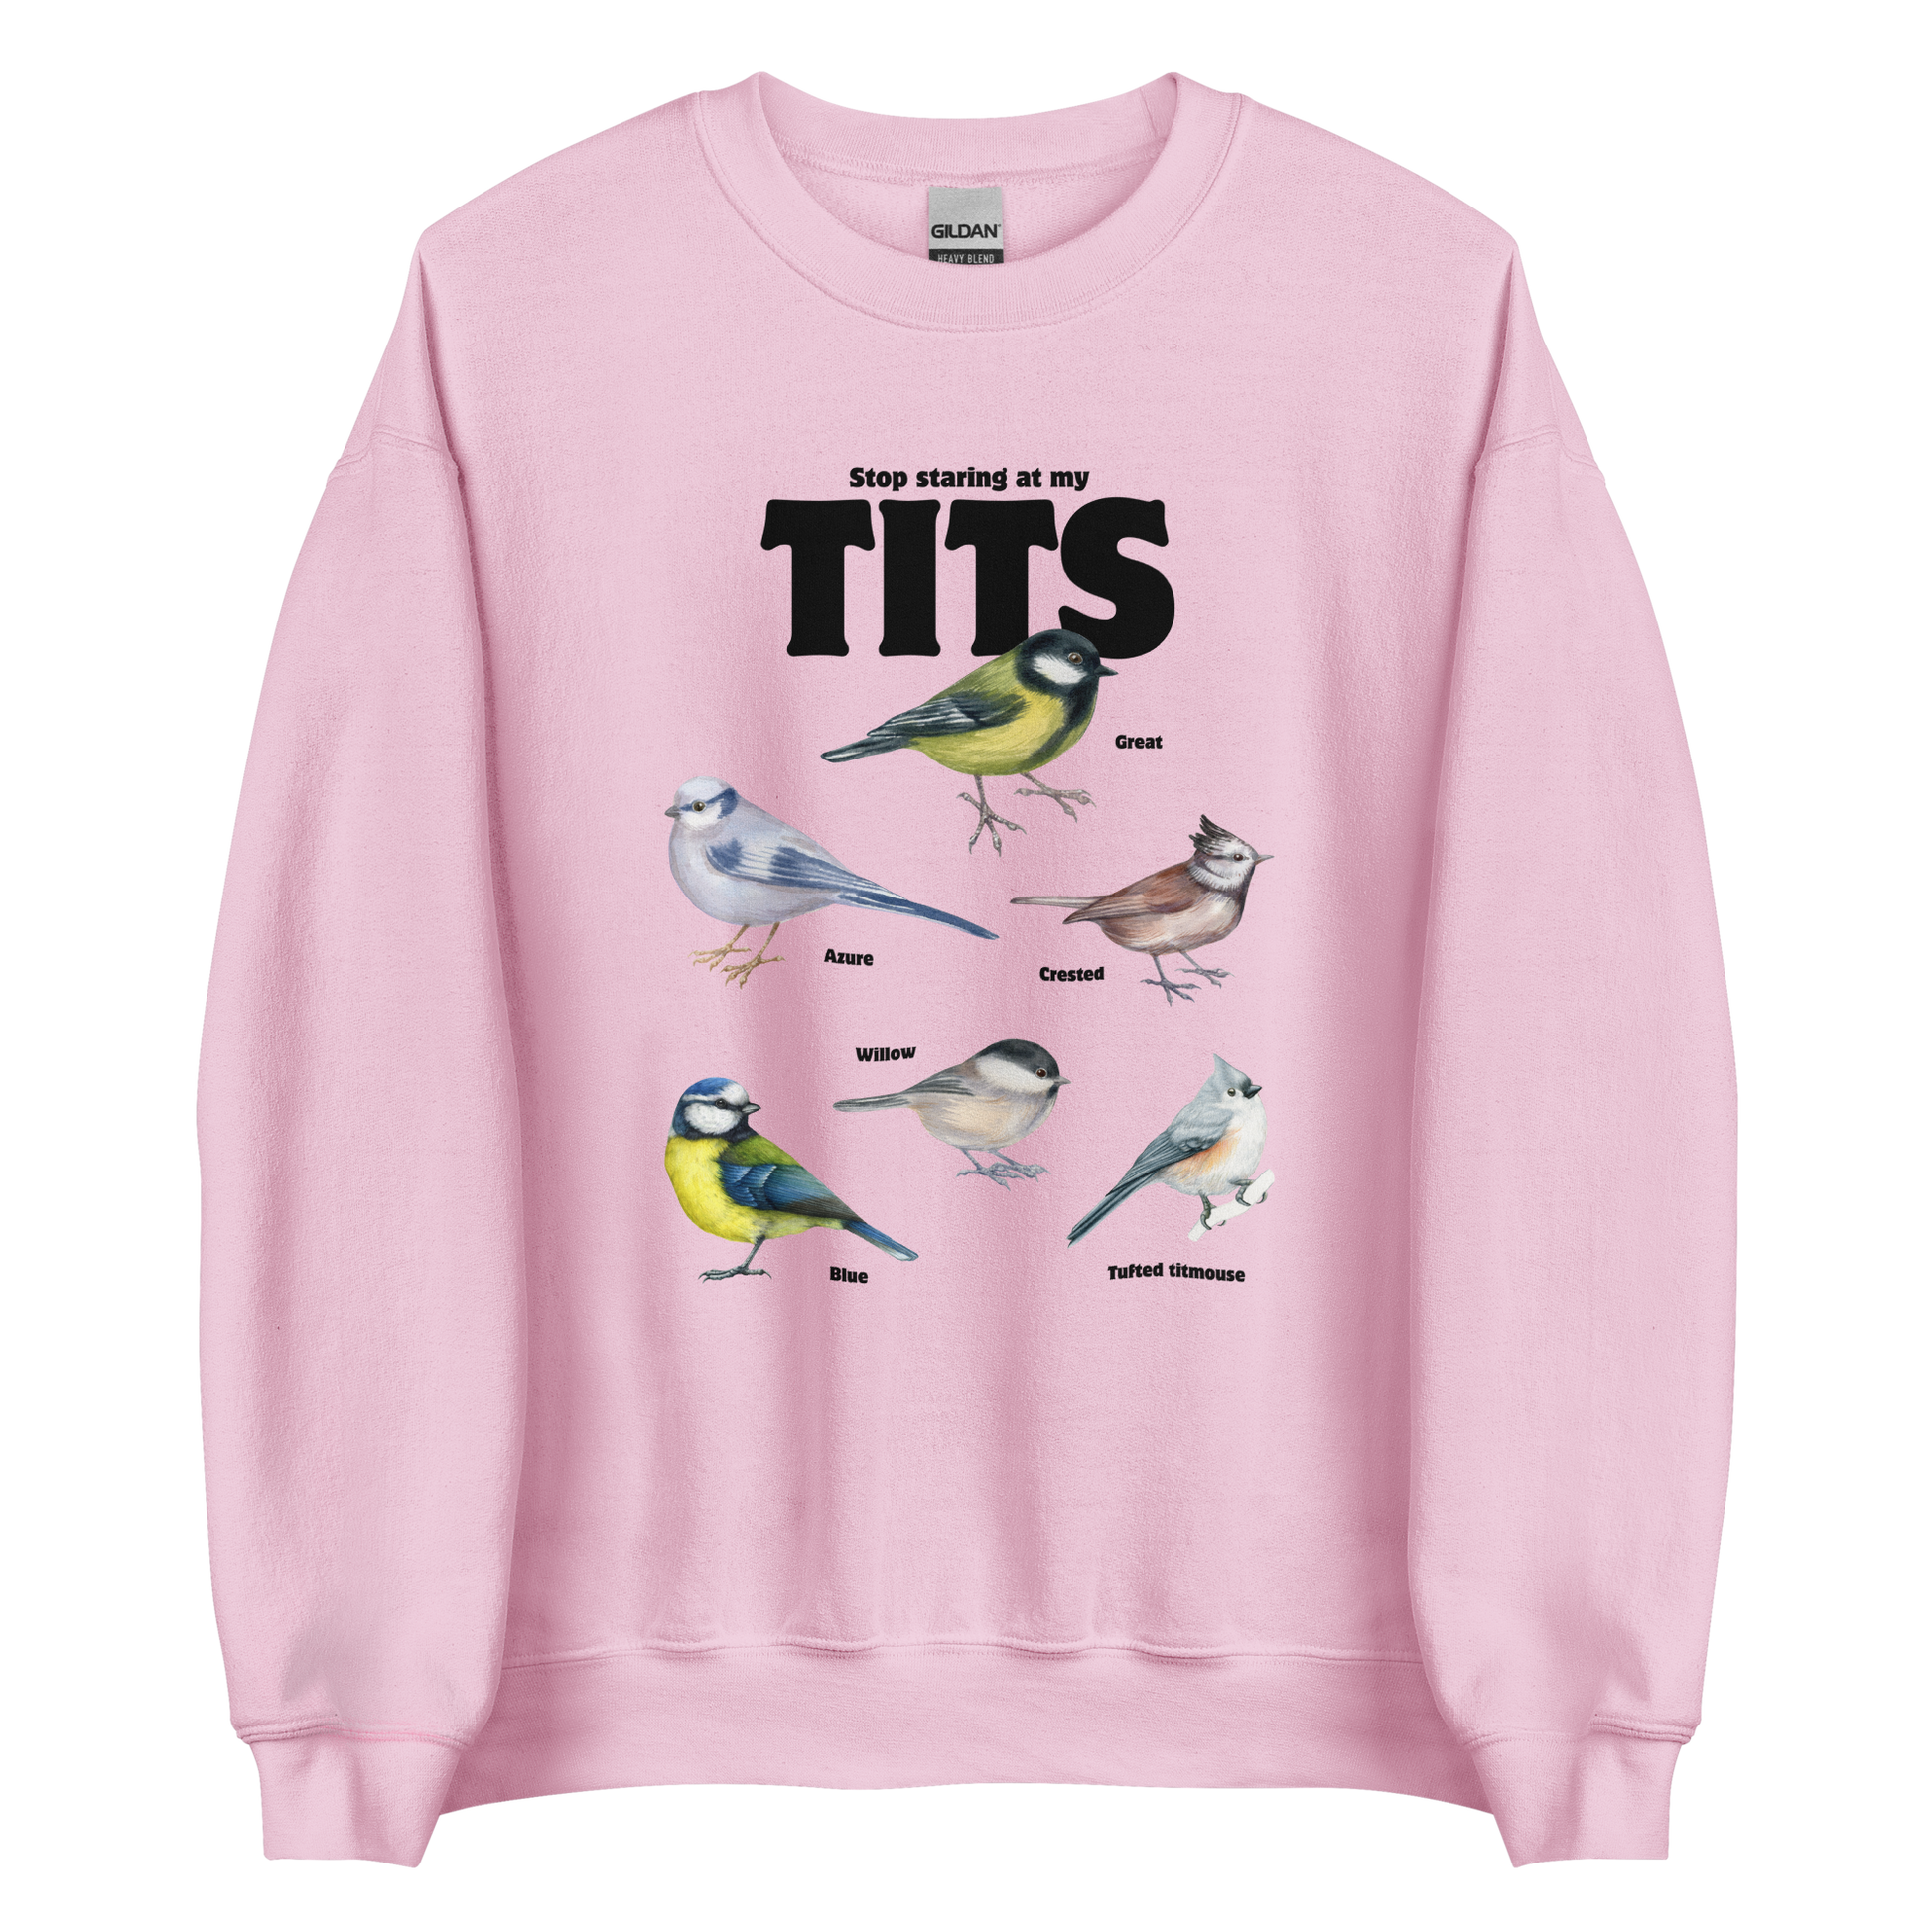 Light Pink Tit Sweatshirt featuring a funny Stop Staring At My Tits graphic on the chest - Funny Graphic Tit Bird Sweatshirts - Boozy Fox